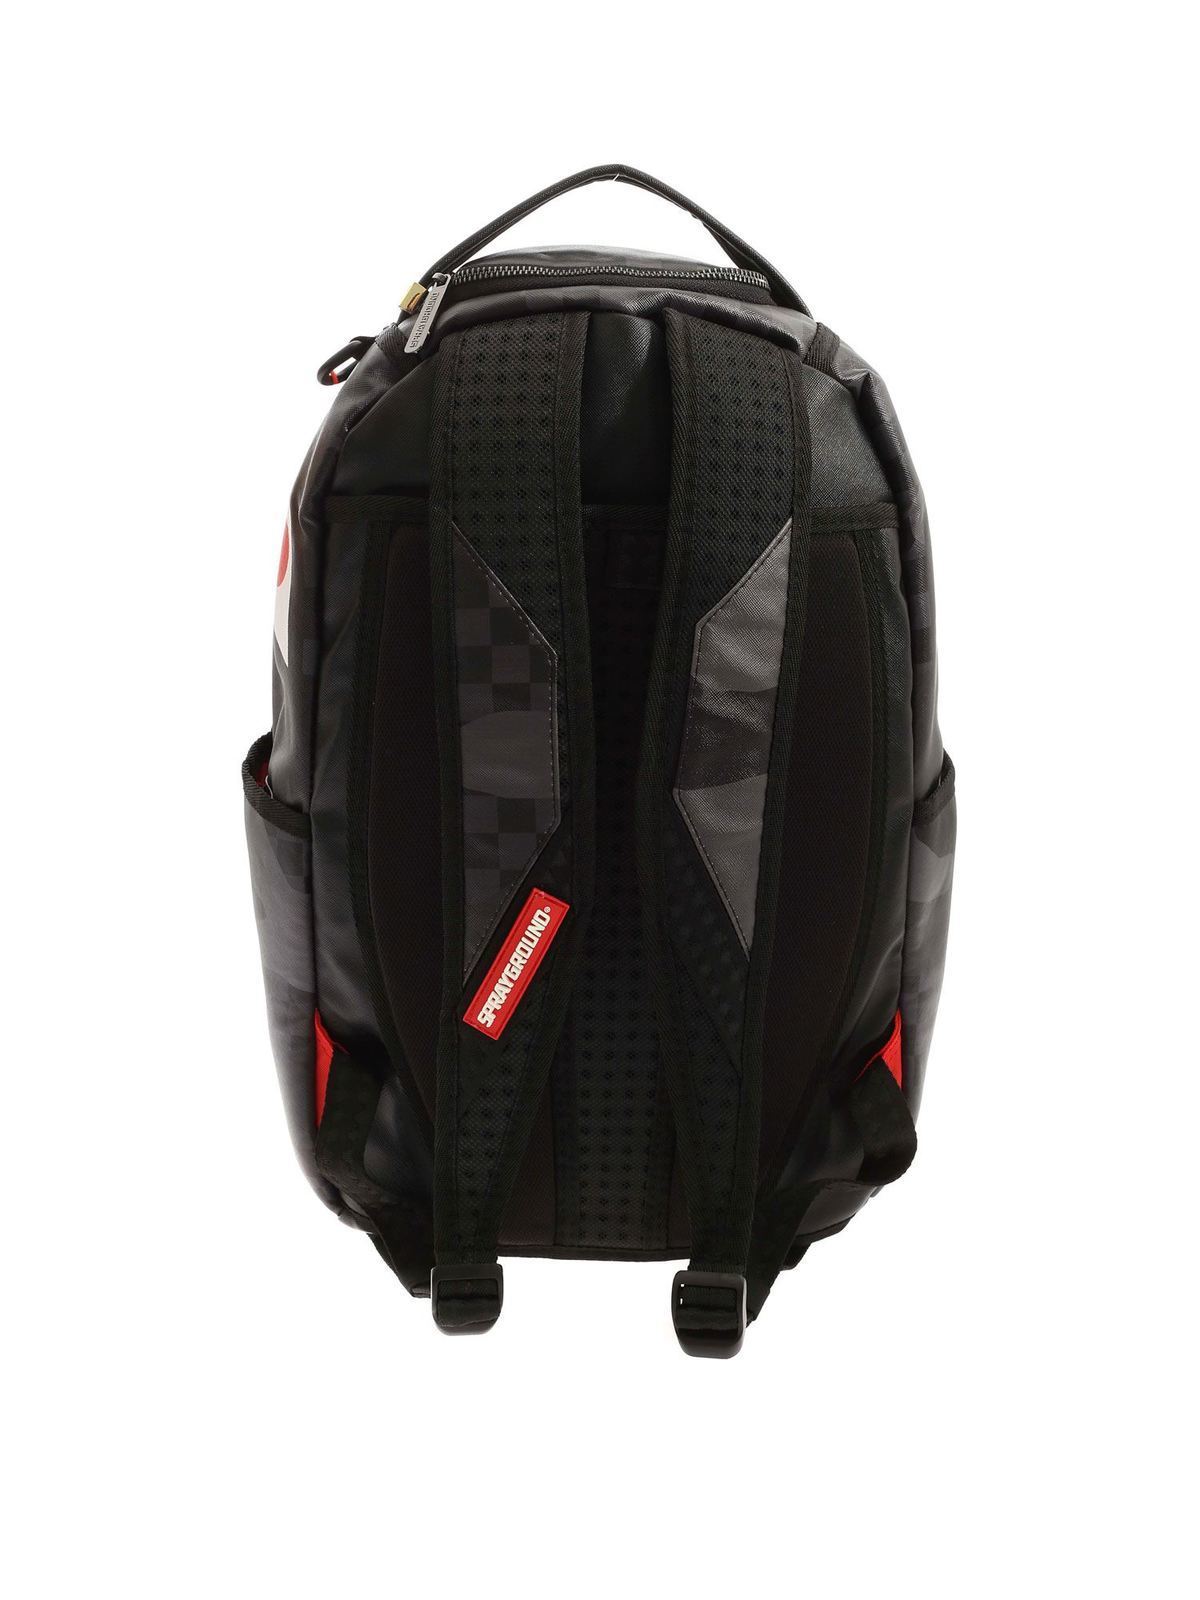 Backpacks Sprayground - 3 AM backpack in black and grey - 910B2922NSZ